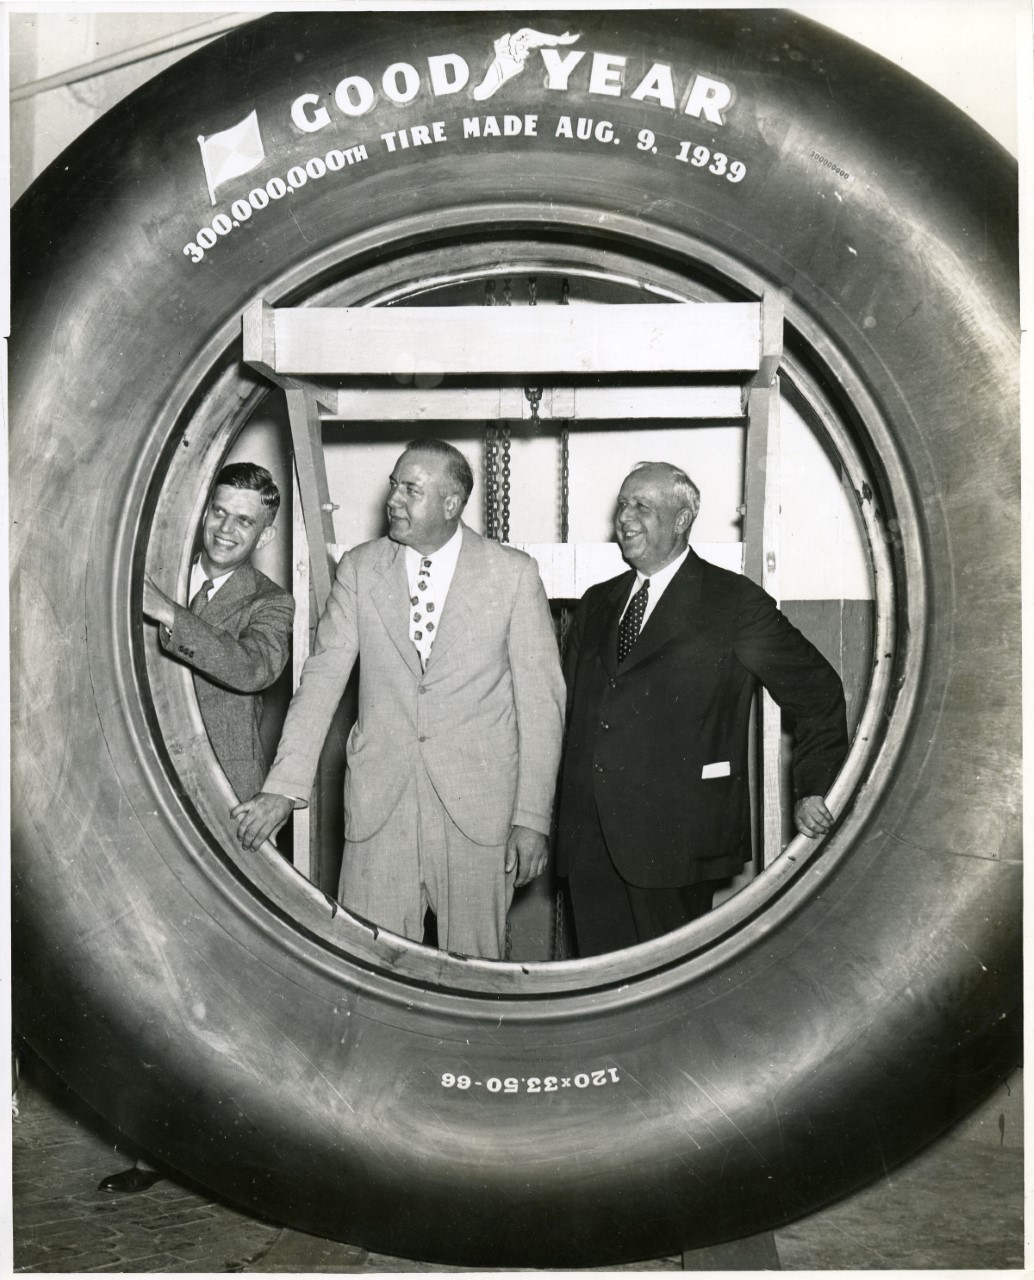 Three men in suits standing behind a very large Goodyear tire, which frames them. Text on the tire reads "300,000,000th tire made August 9, 1939."